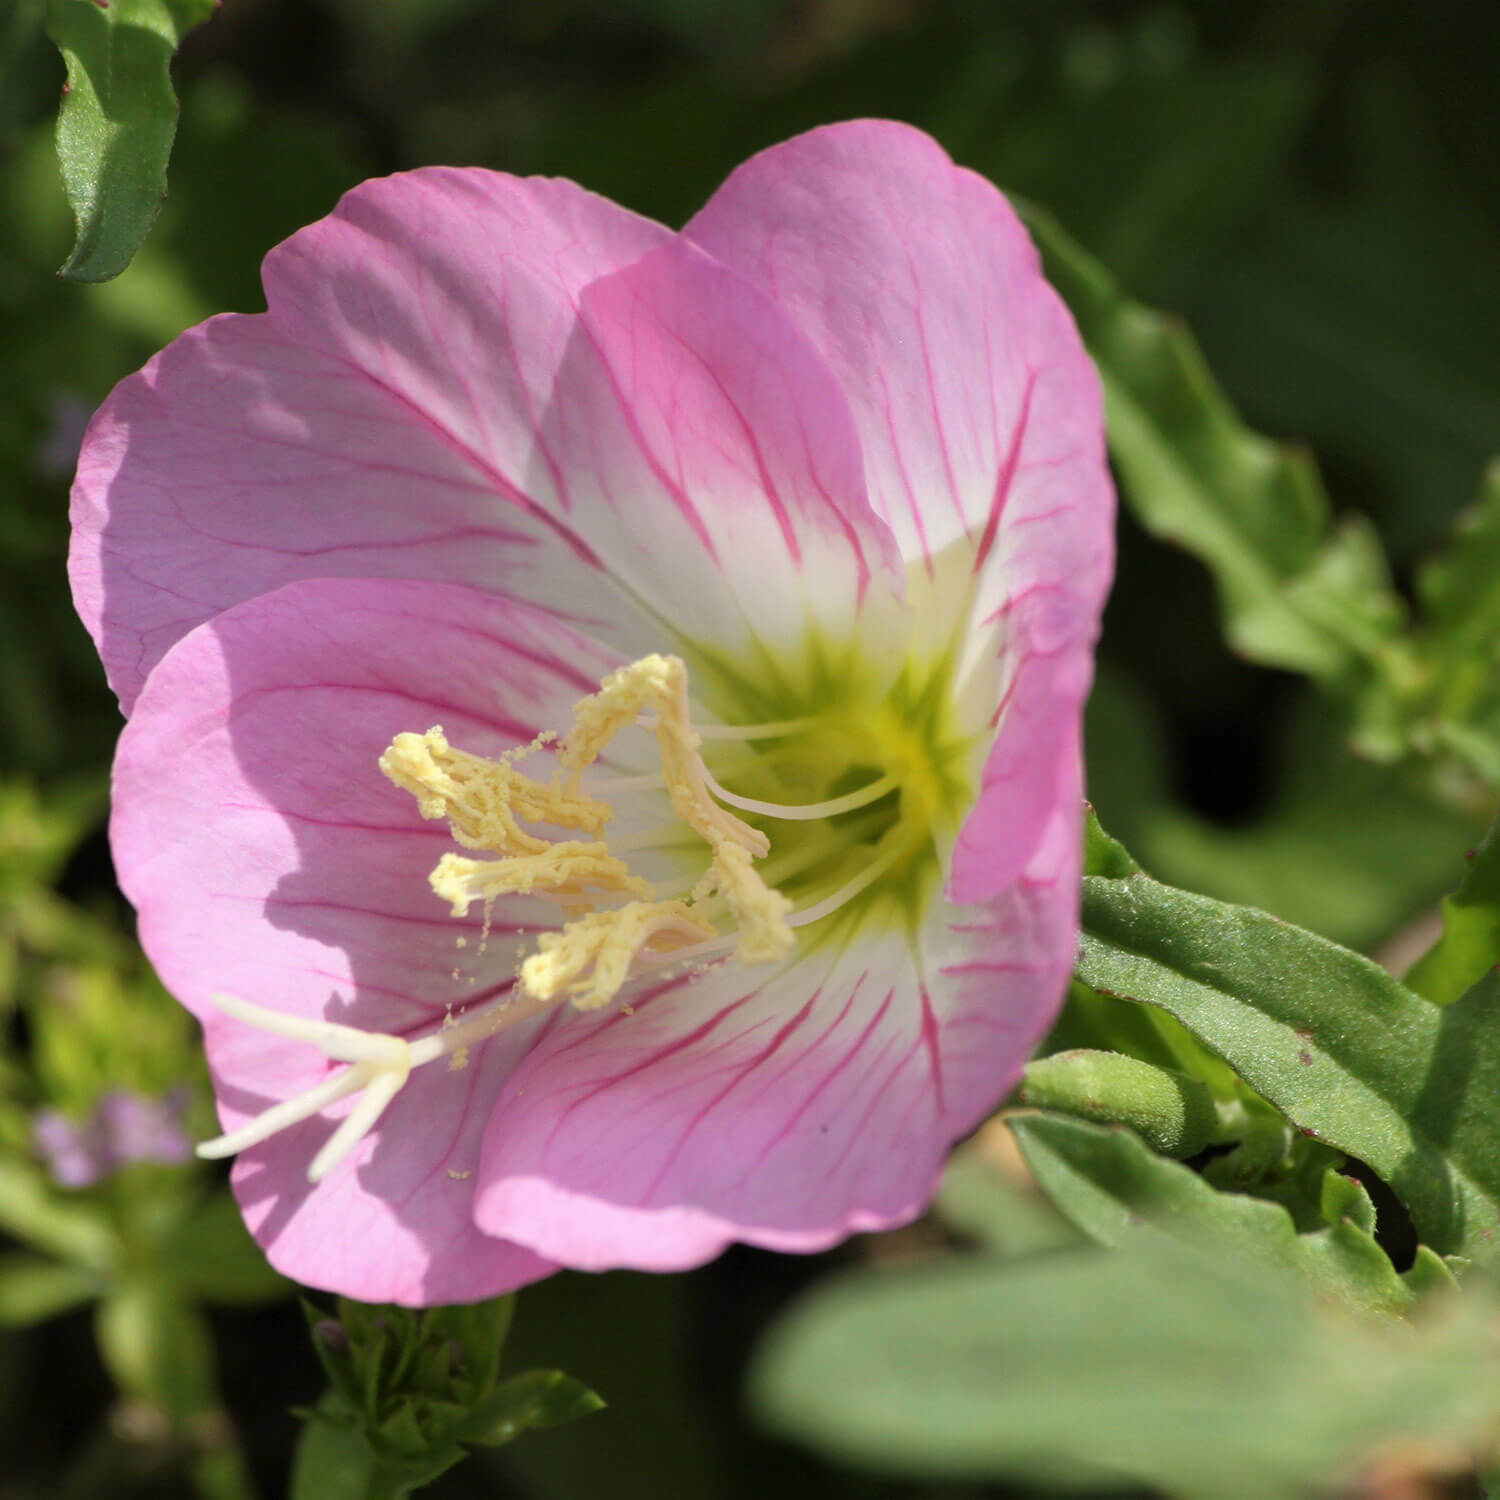 Close up of pink and white flower from a Oenothera berlandieri 'Siskiyou Pink', Evening Primrose plant